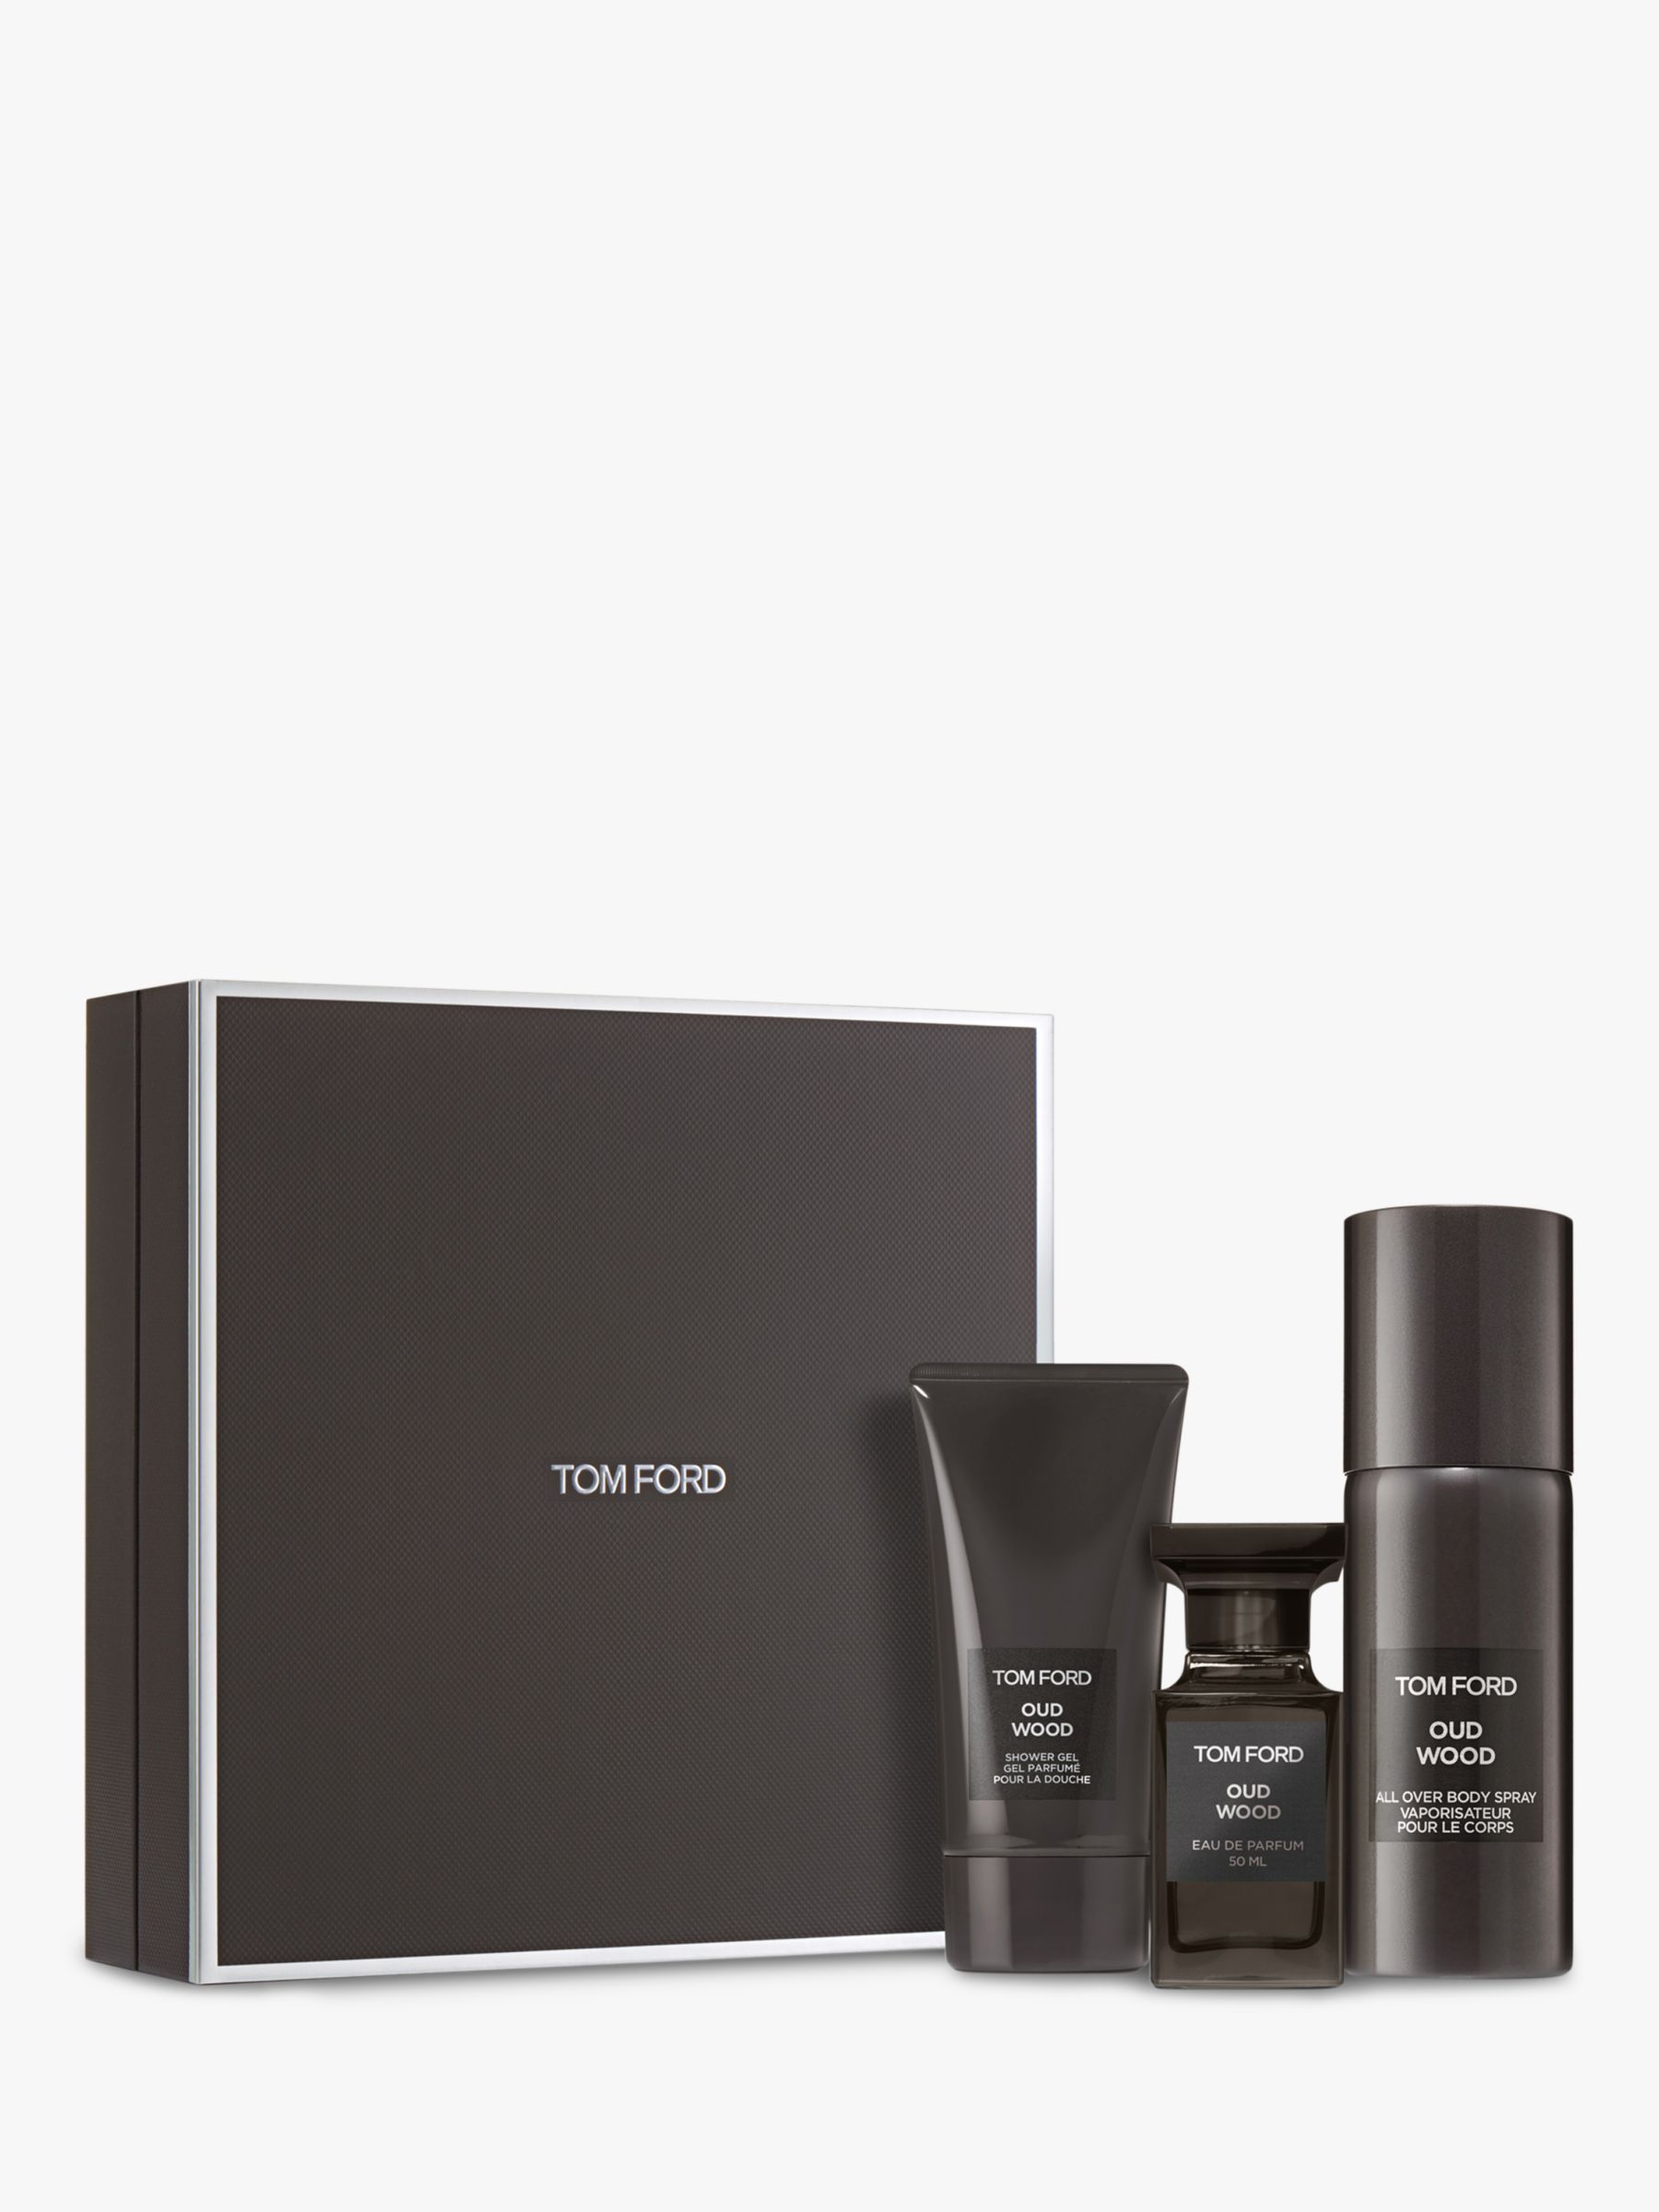 TOM FORD Oud Wood 3 Piece Fragrance Gift Set at John Lewis & Partners